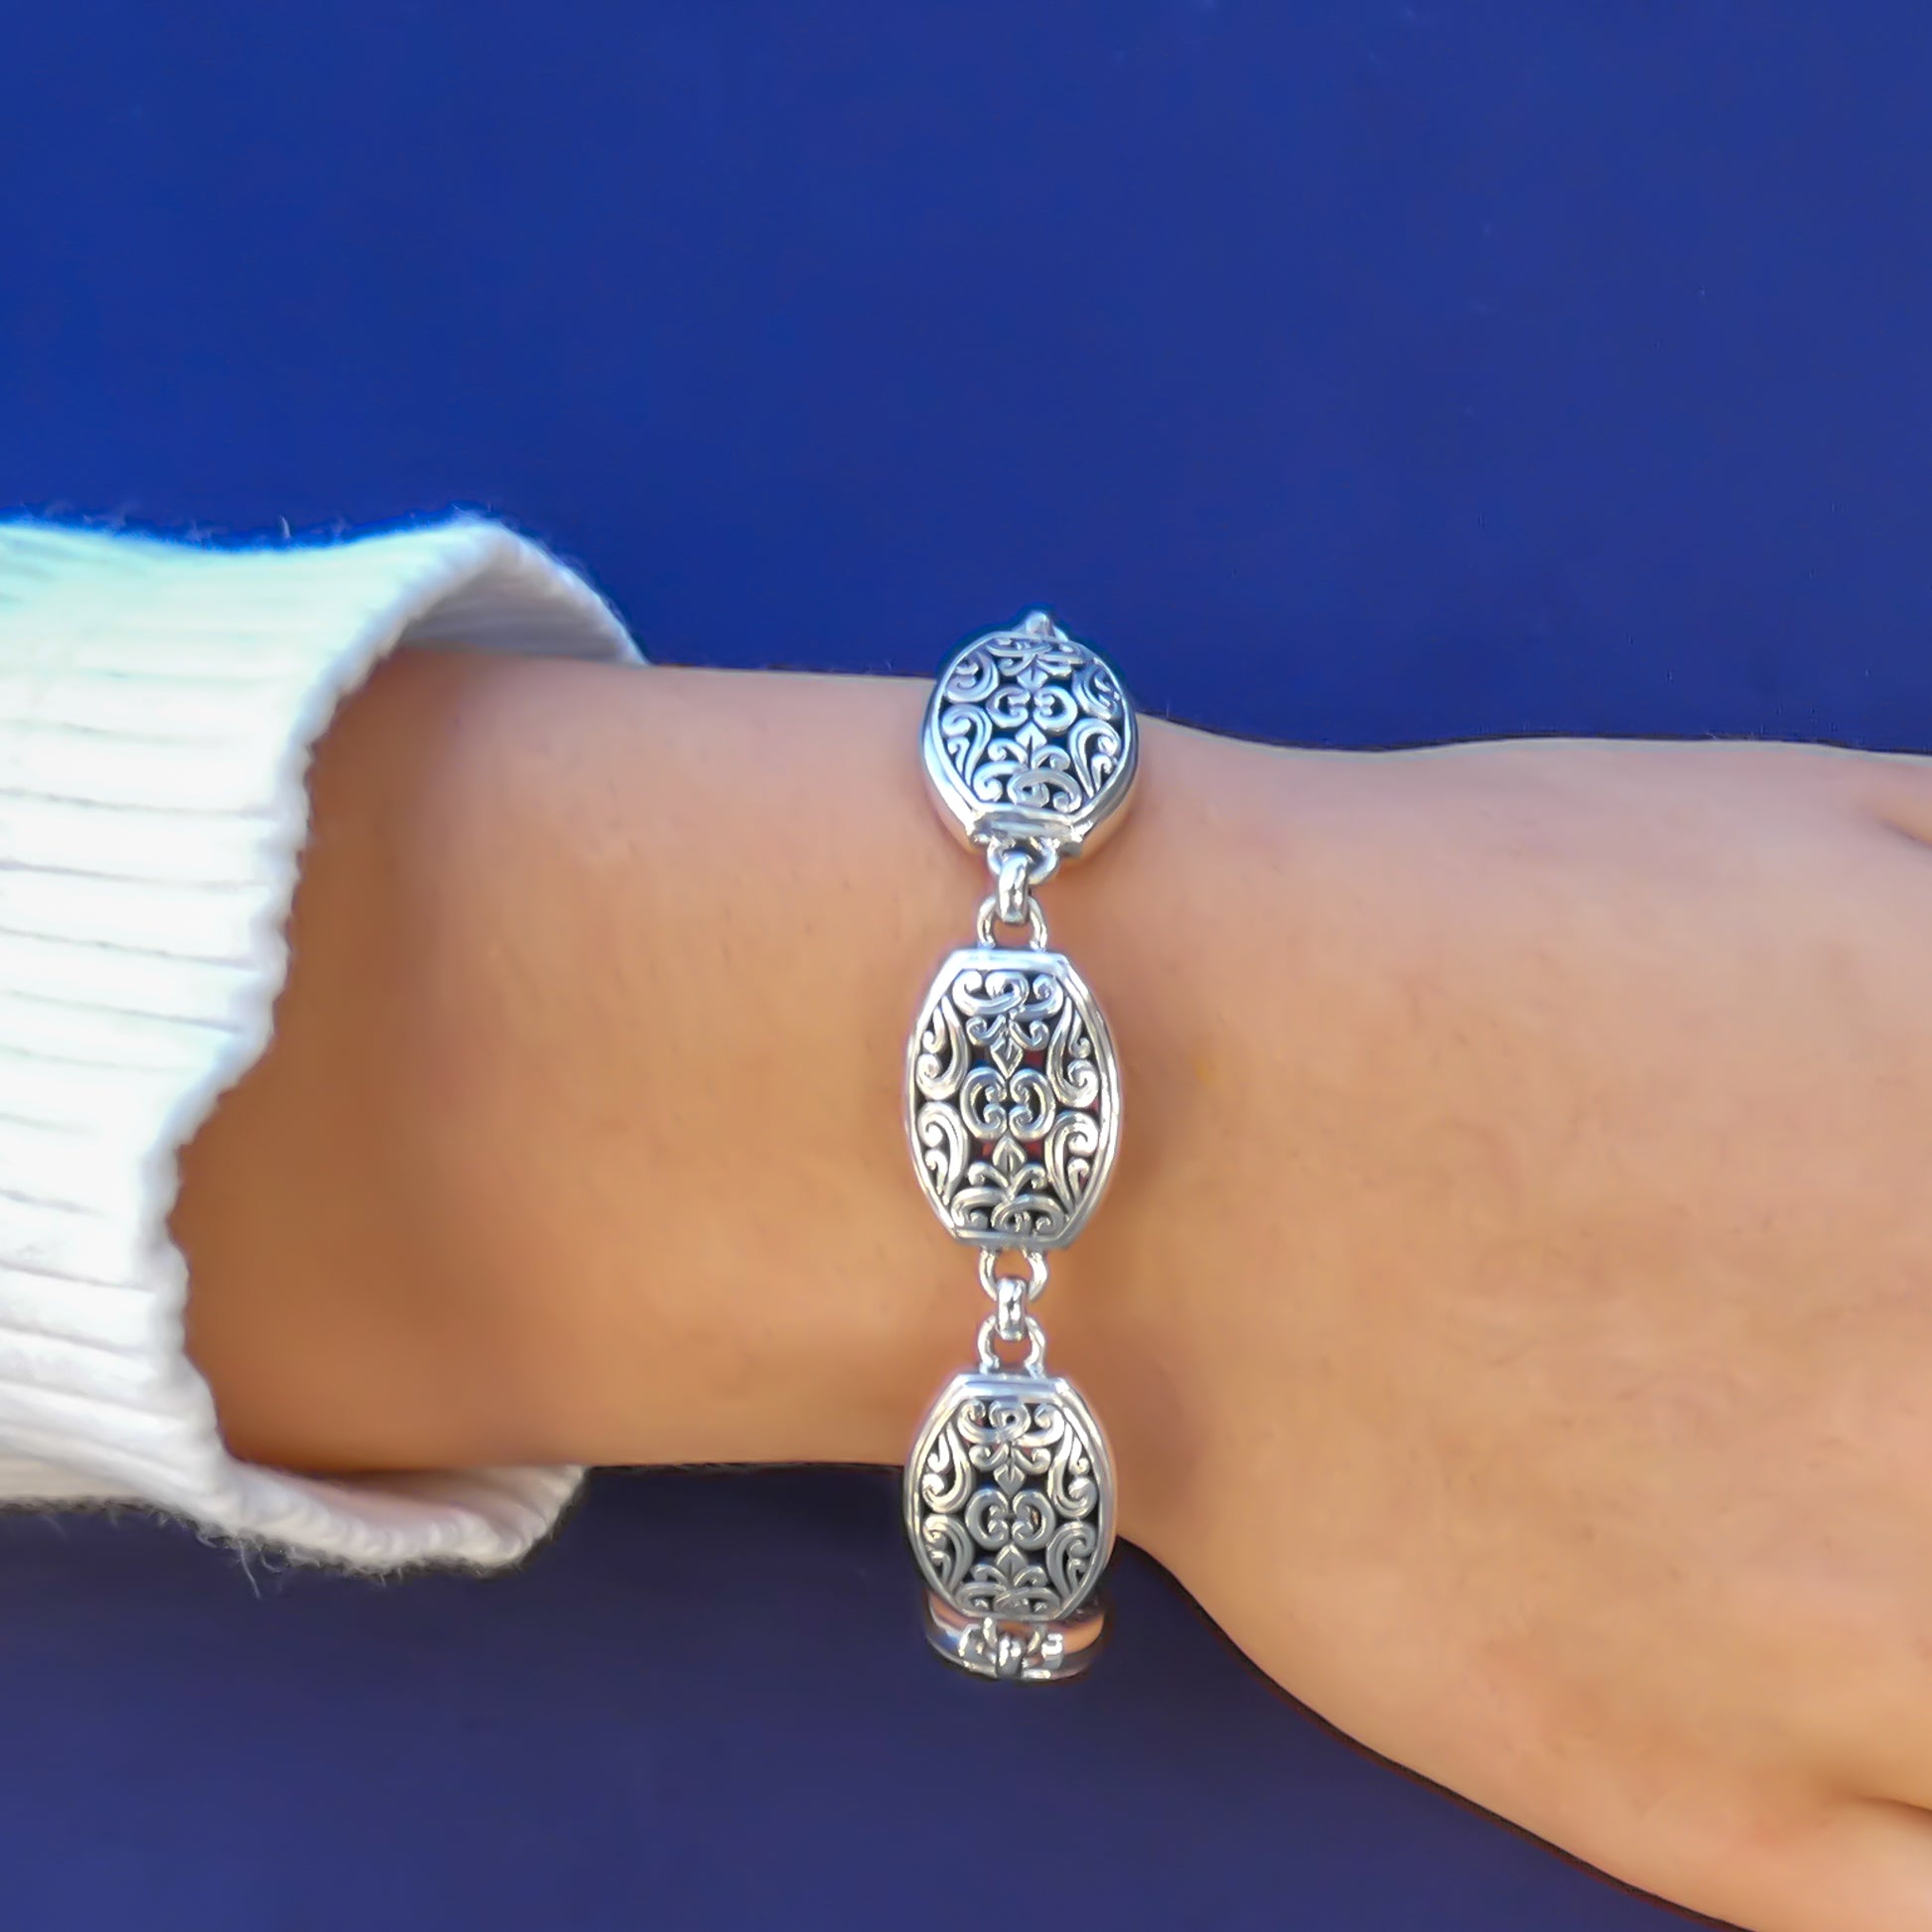 Woman wearing a silver bracelet made of ornate oval links.